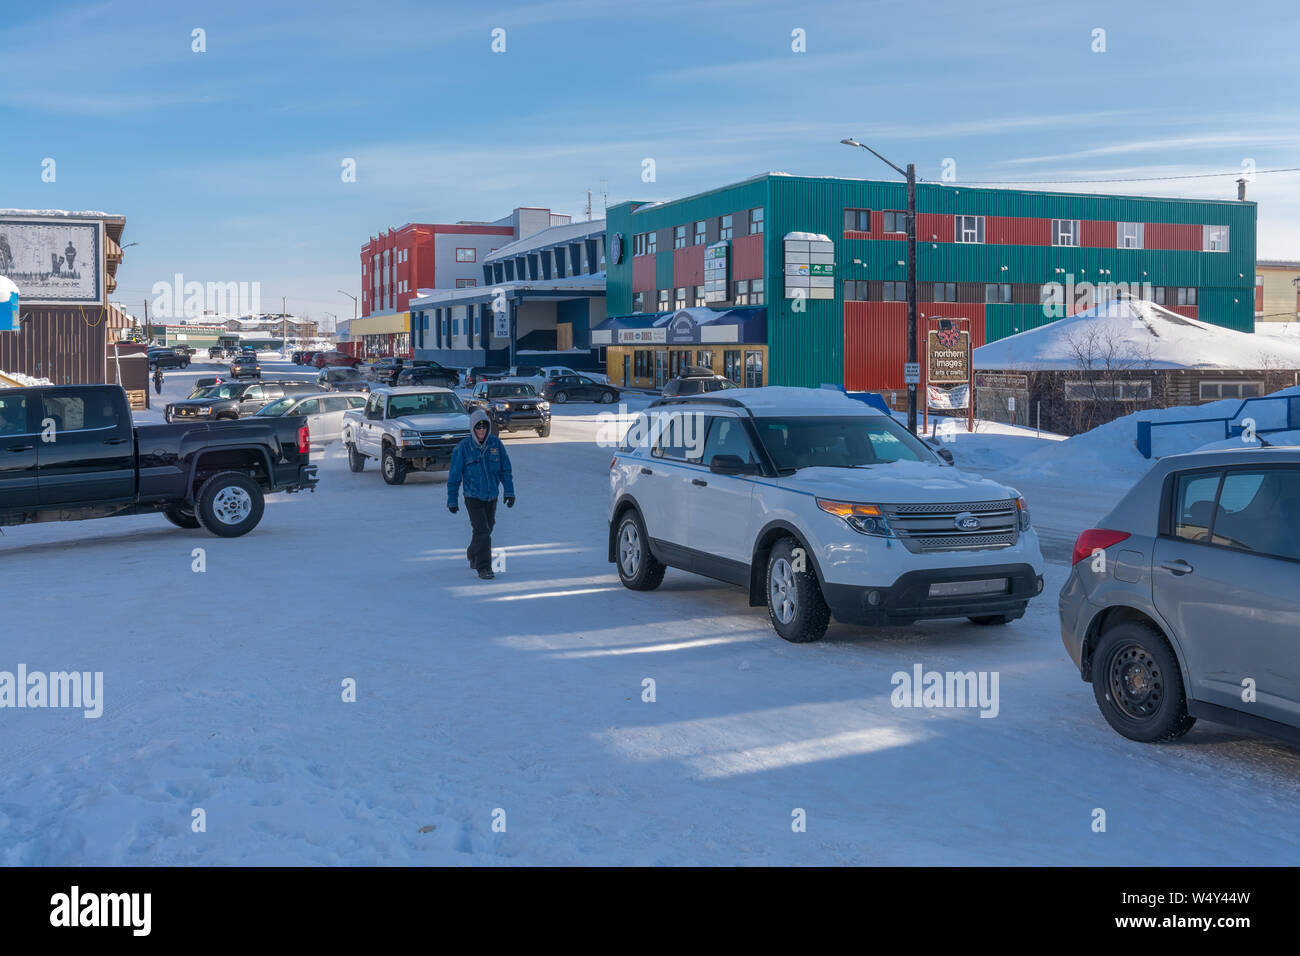 Inuvik, Northwest Territories, Canada - March 28, 2017:  the main business street in the Arctic community Stock Photo